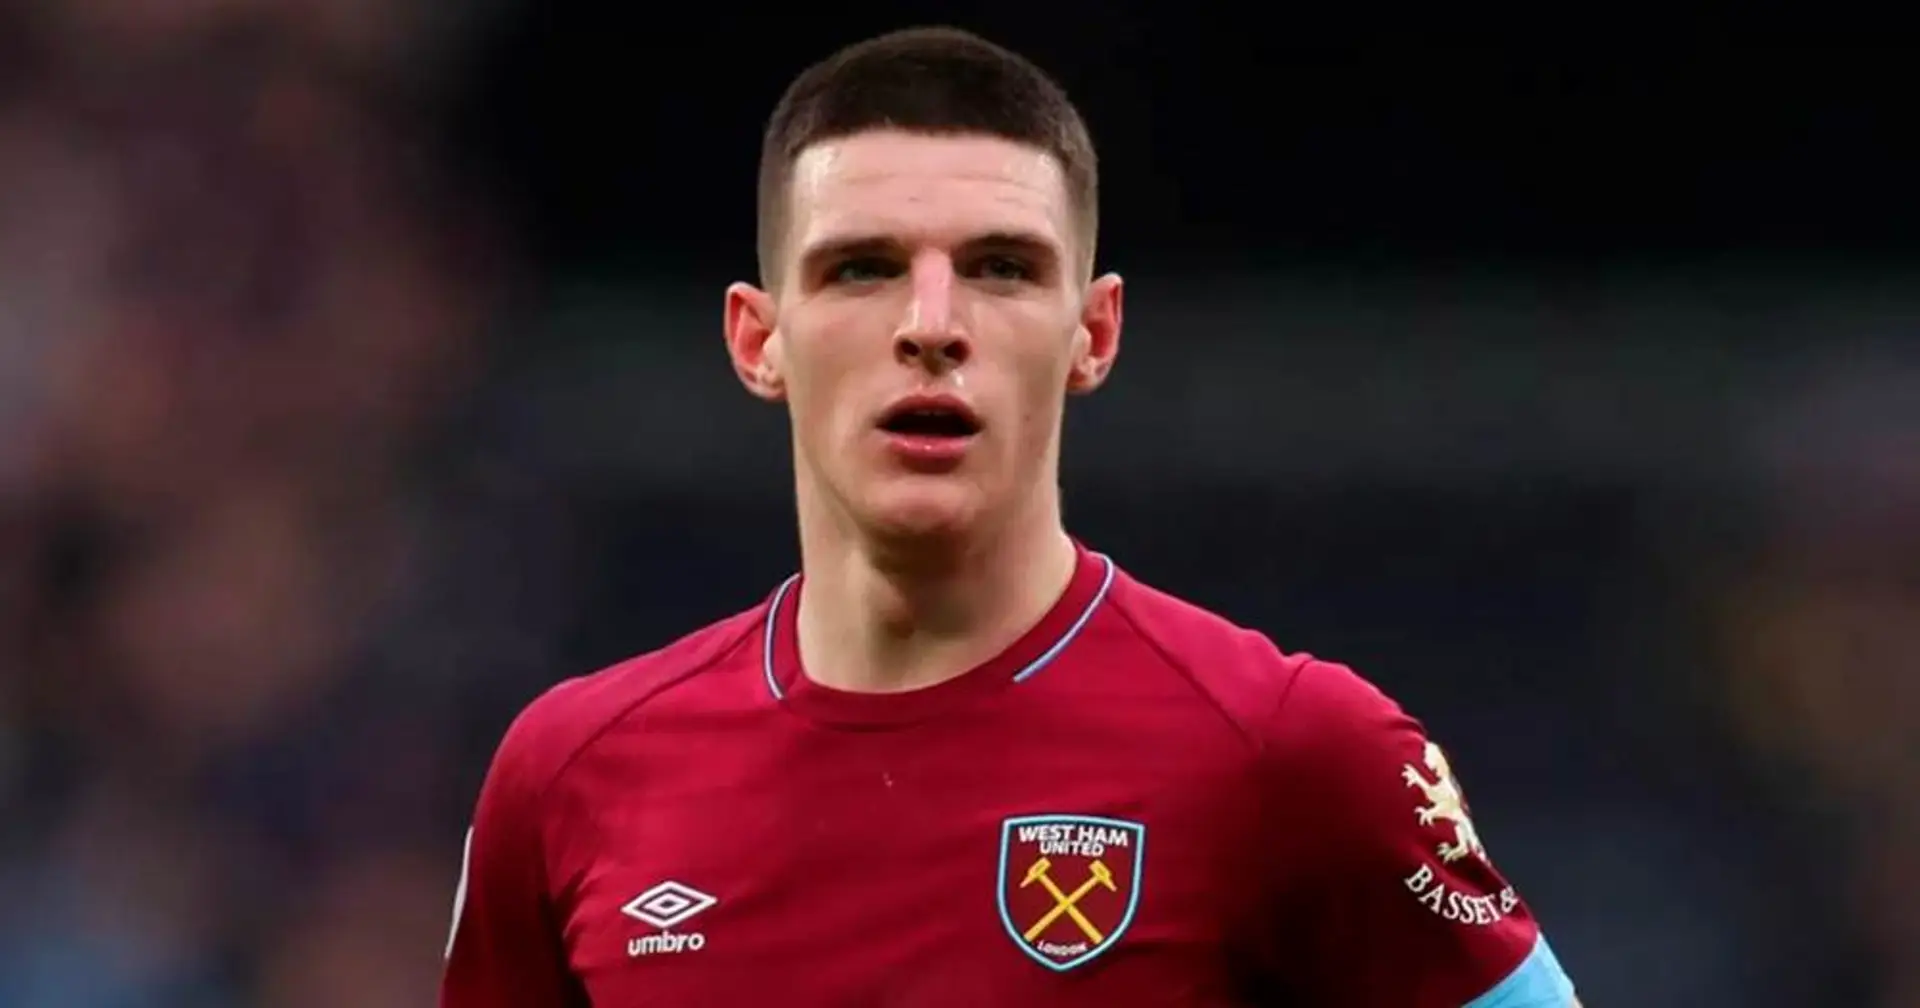 I finally get why Lampard wants Declan Rice